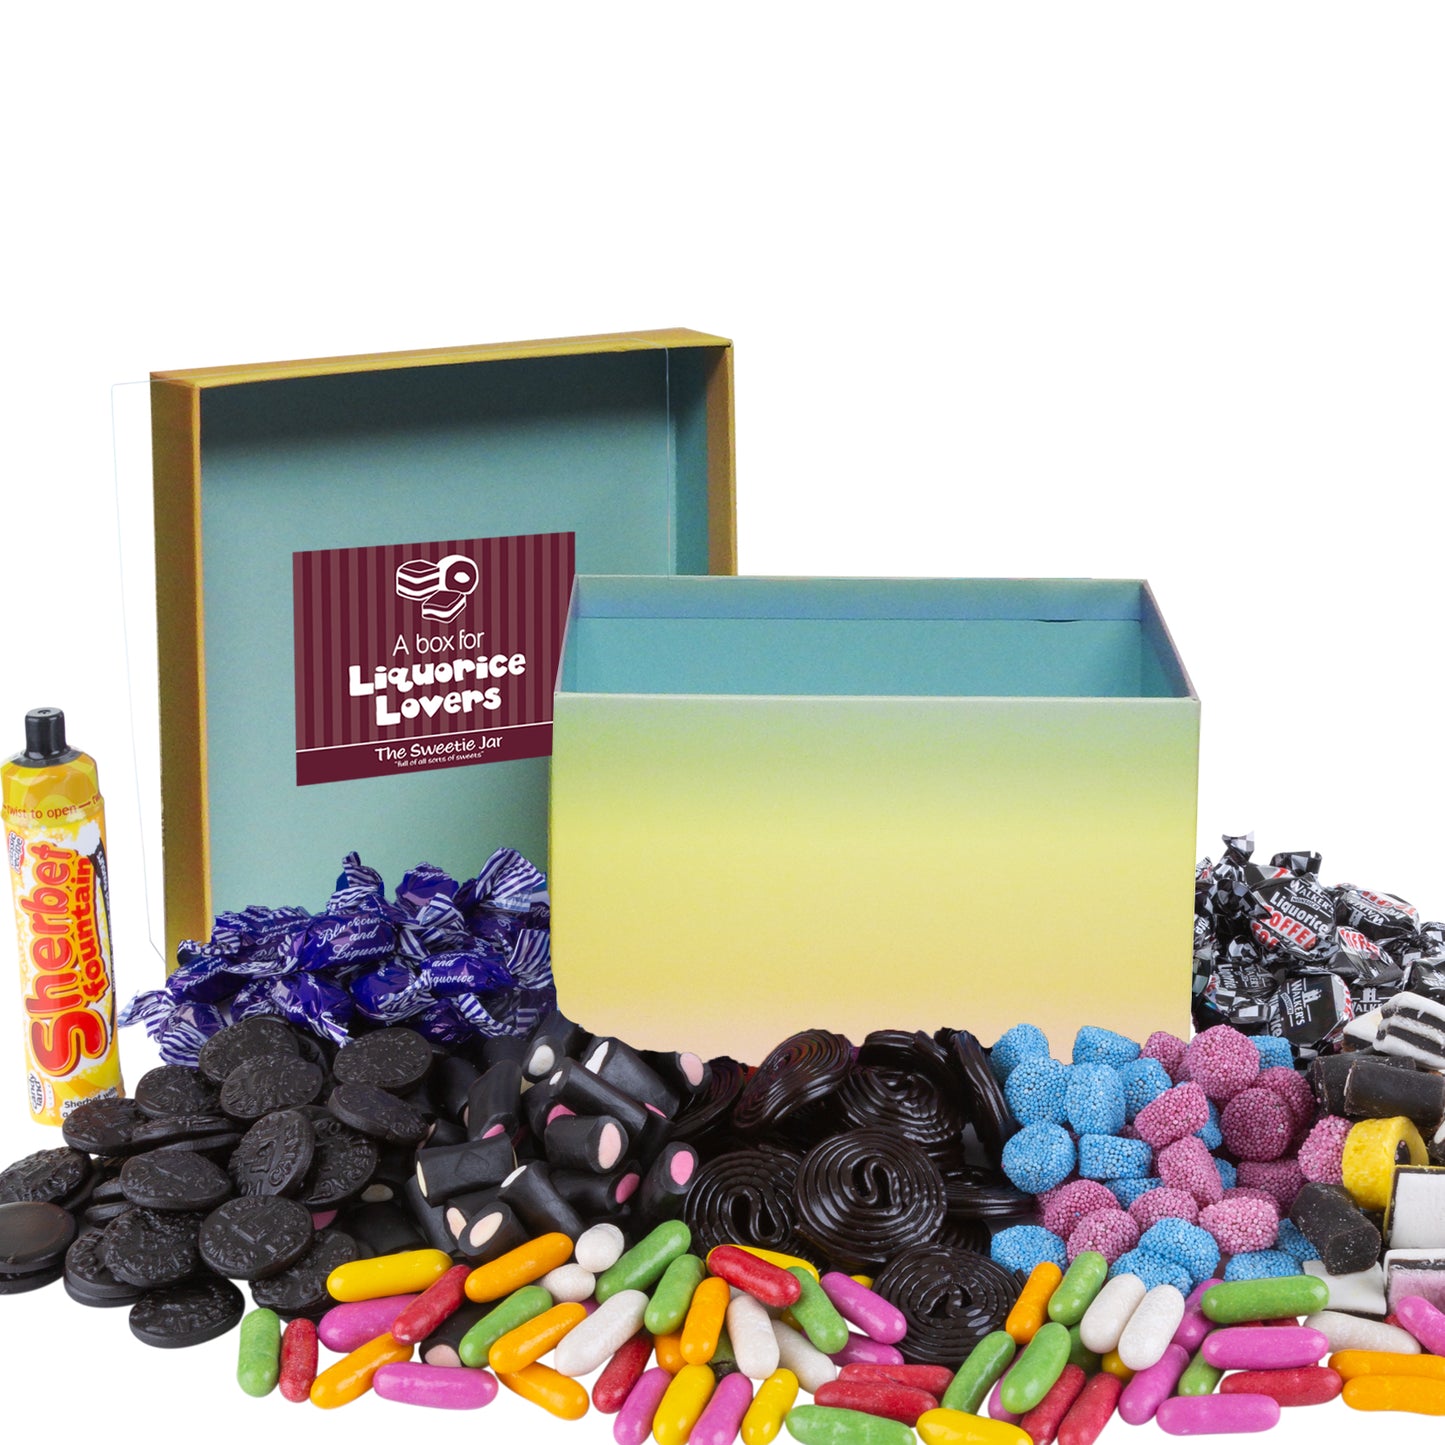 Liquorice Sweets Gift Box : Medium - Liquorice Sweets Gift Boxes at The Sweetie Jar